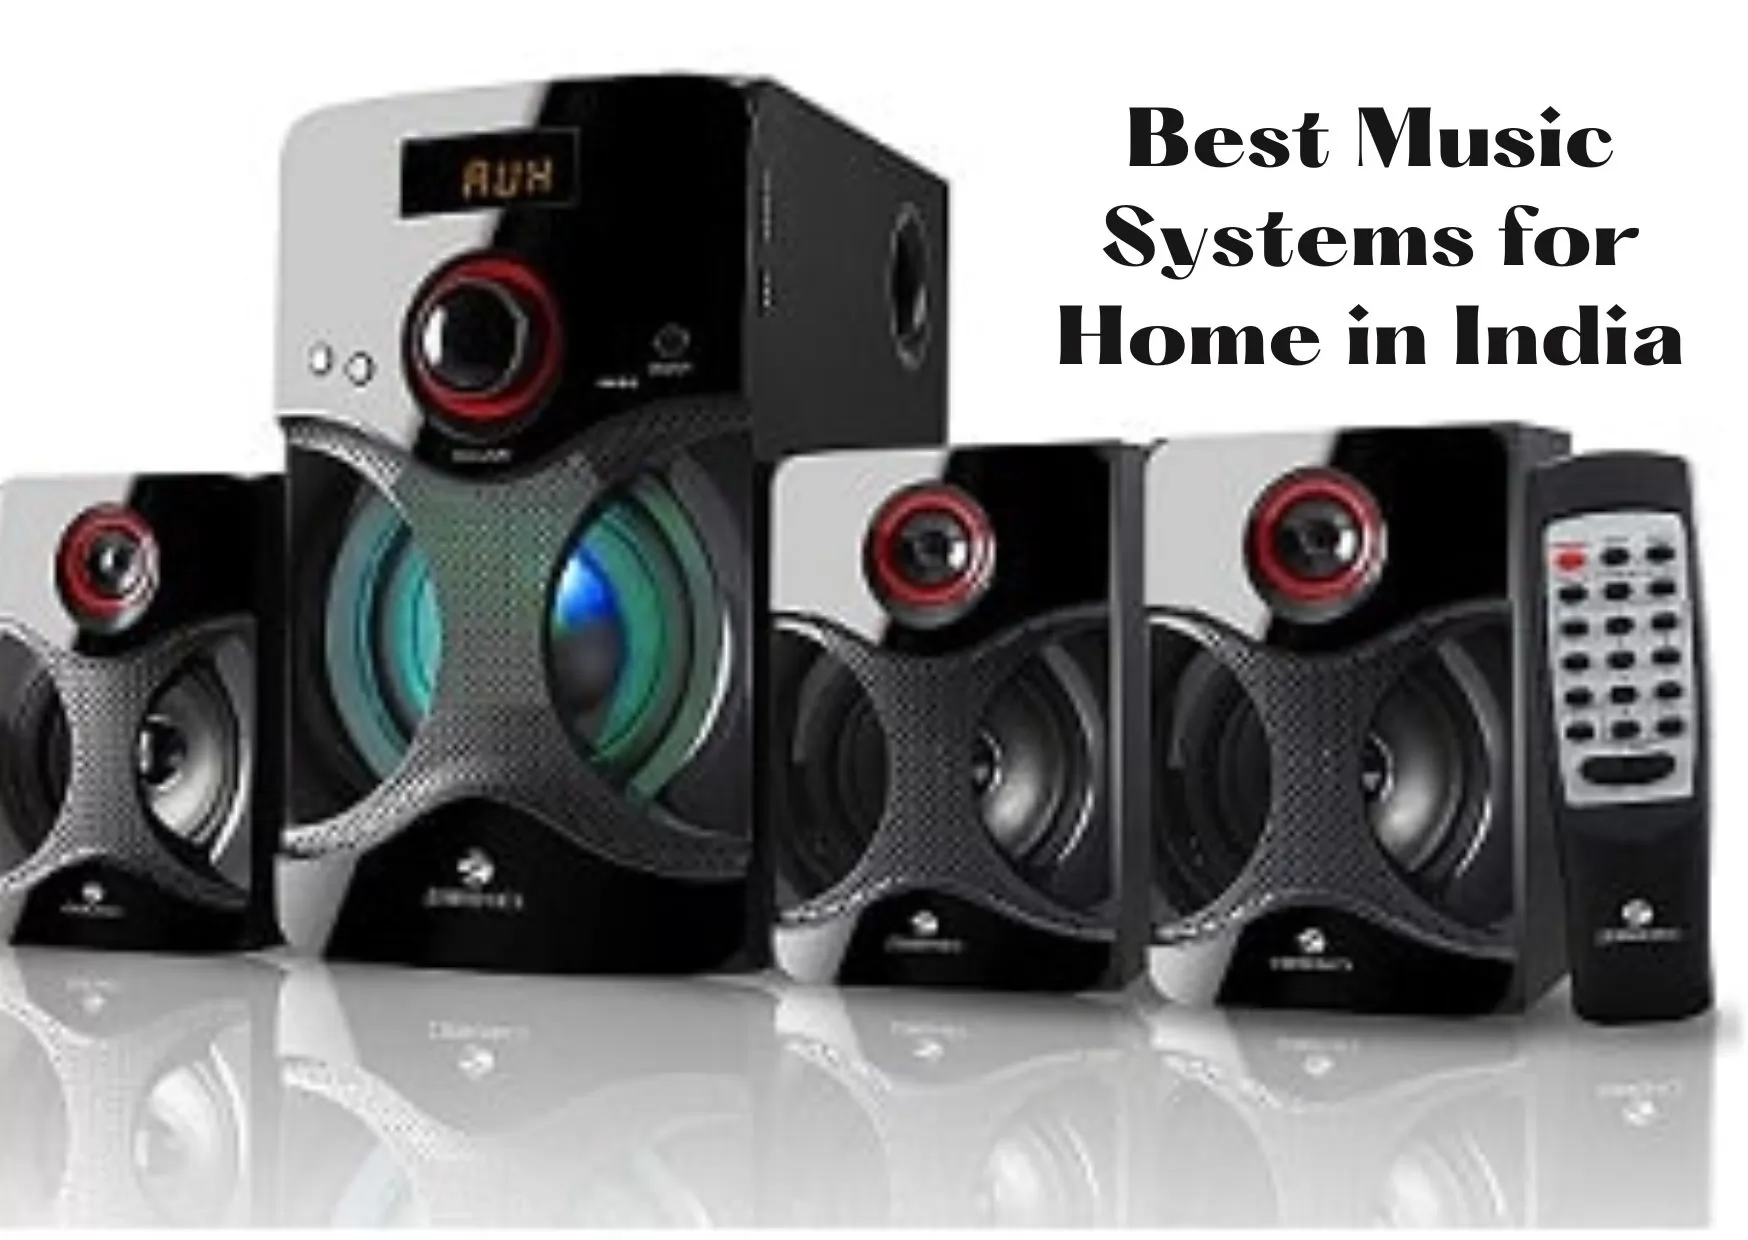 Best Music Systems for Home in India